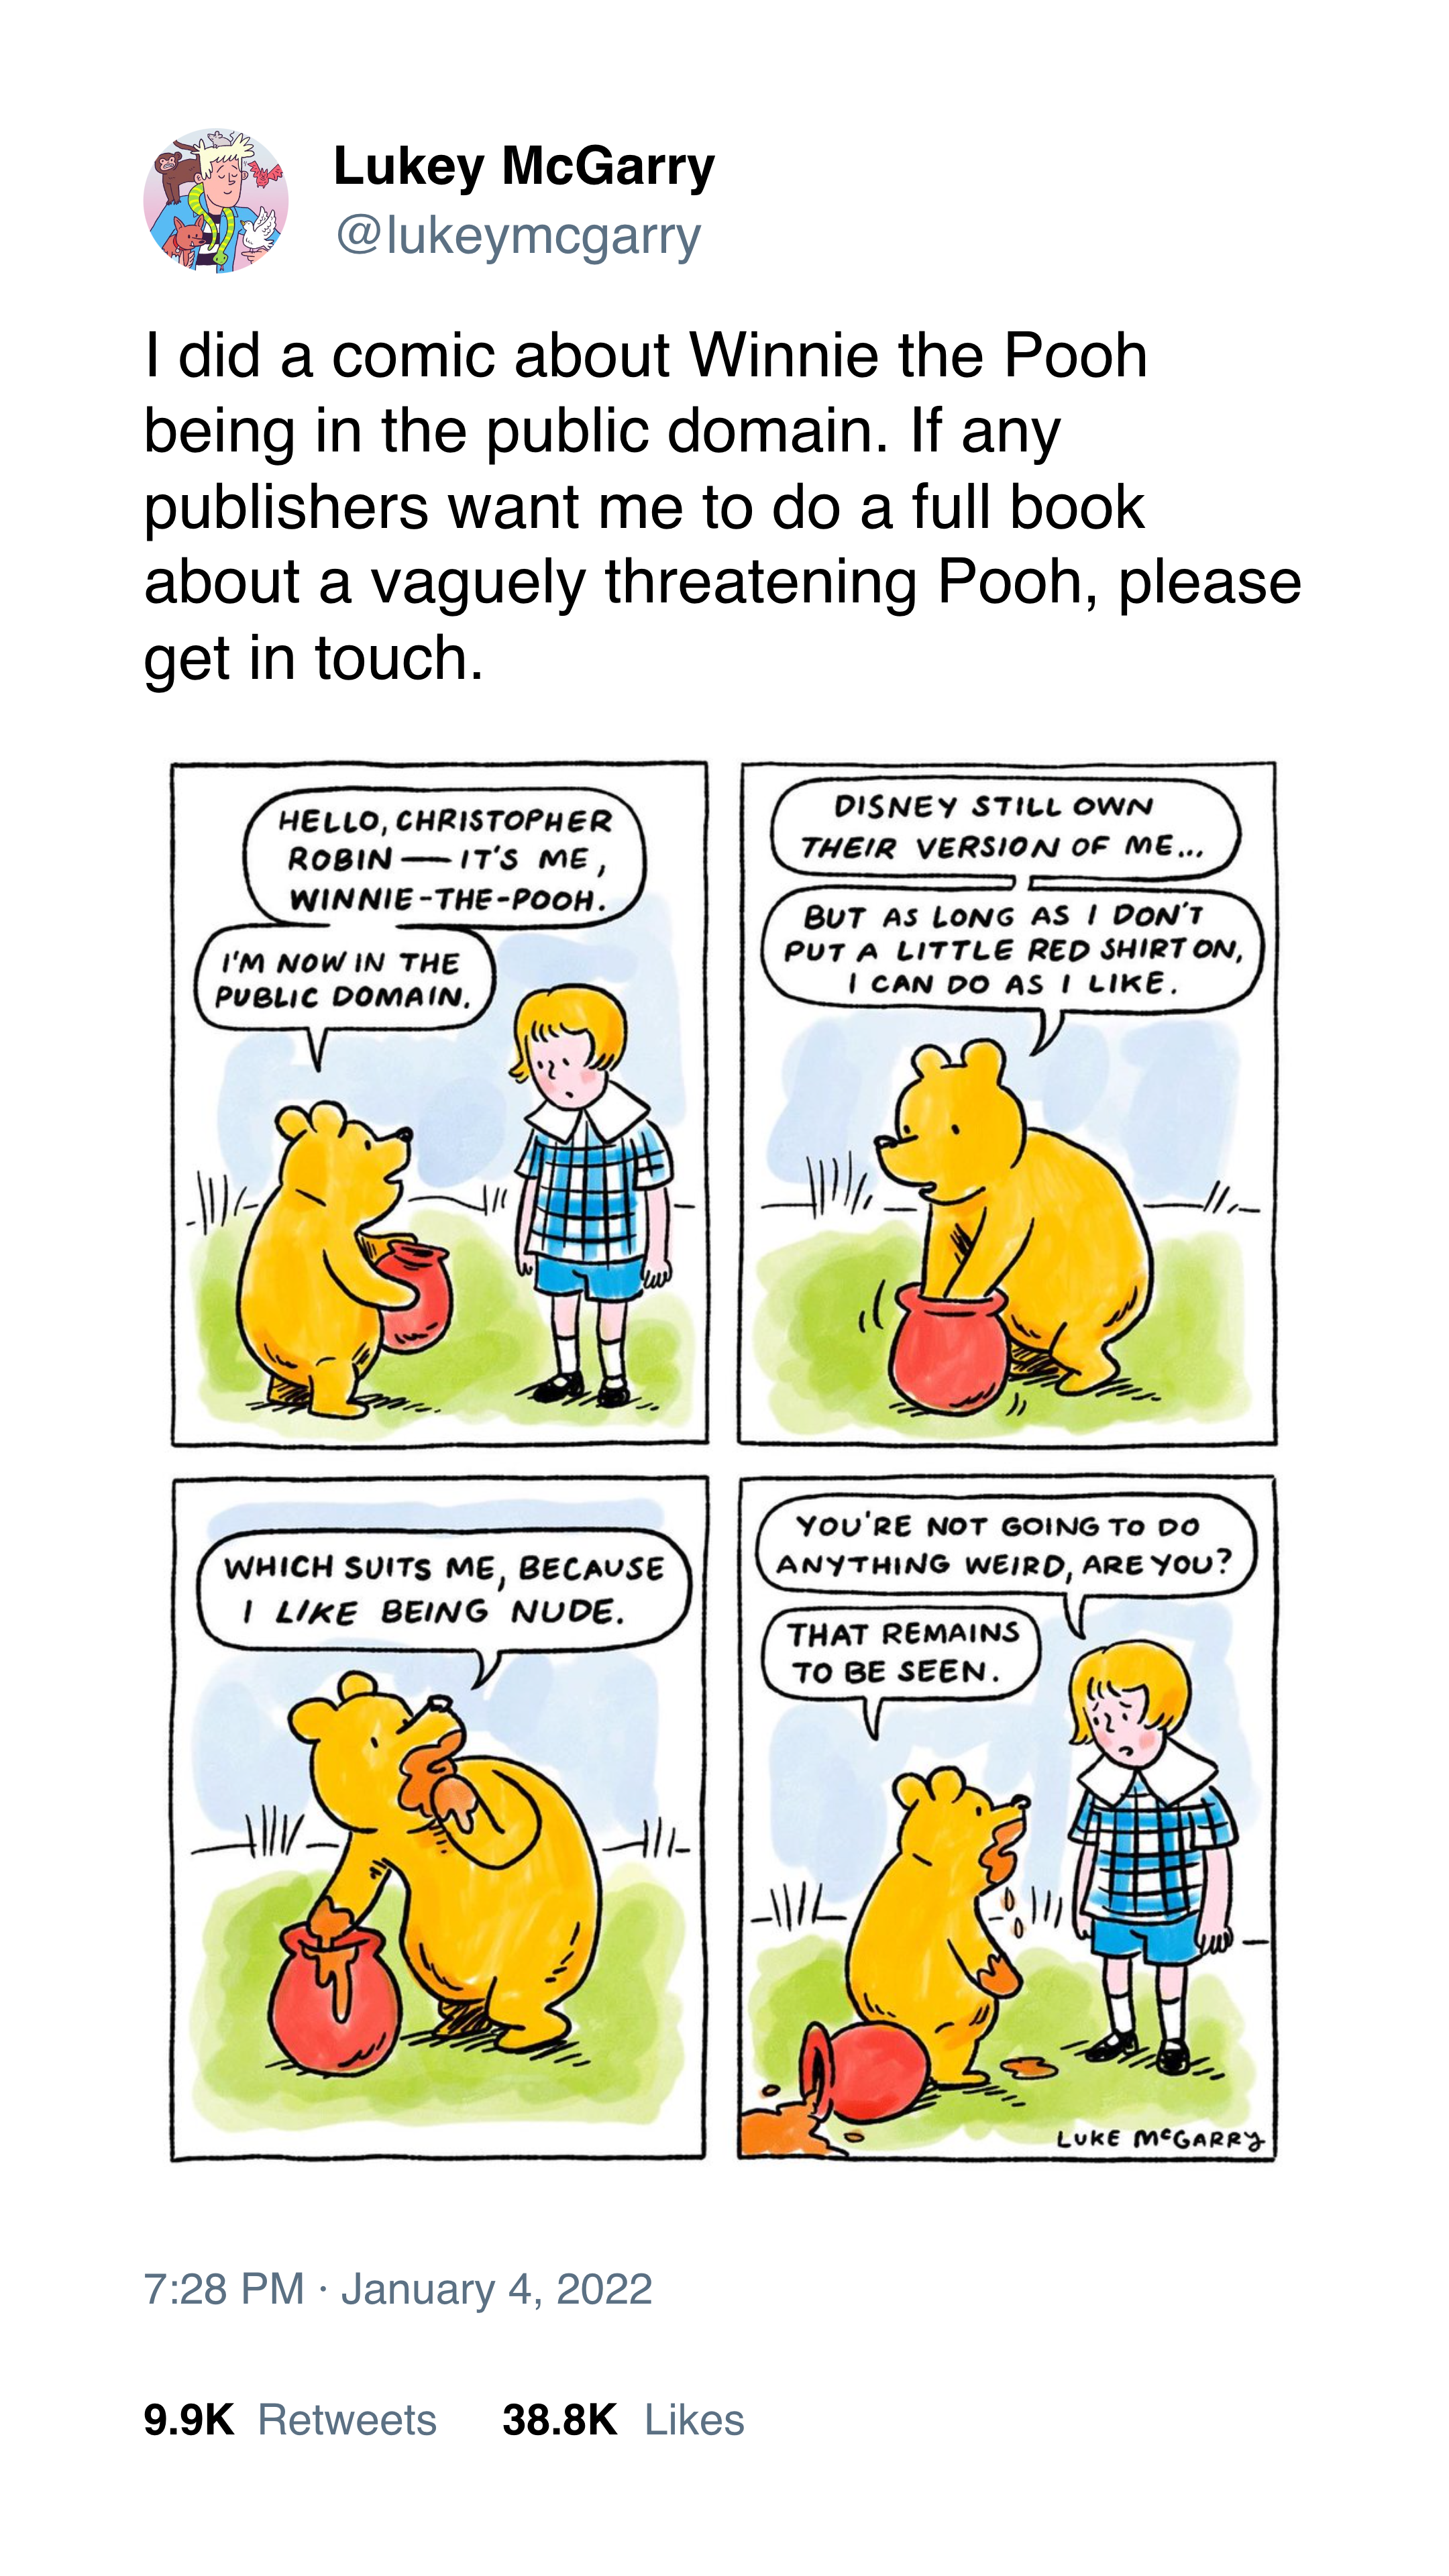 @lukeymcgarry on Twitter: "I did a comic about Winnie the Pooh being in the public domain. If any publishers want me to do a full book about a vaguely threatening Pooh, please get in touch." Comic is about Pooh not being able to wear a red shirt in non-Disney properties.